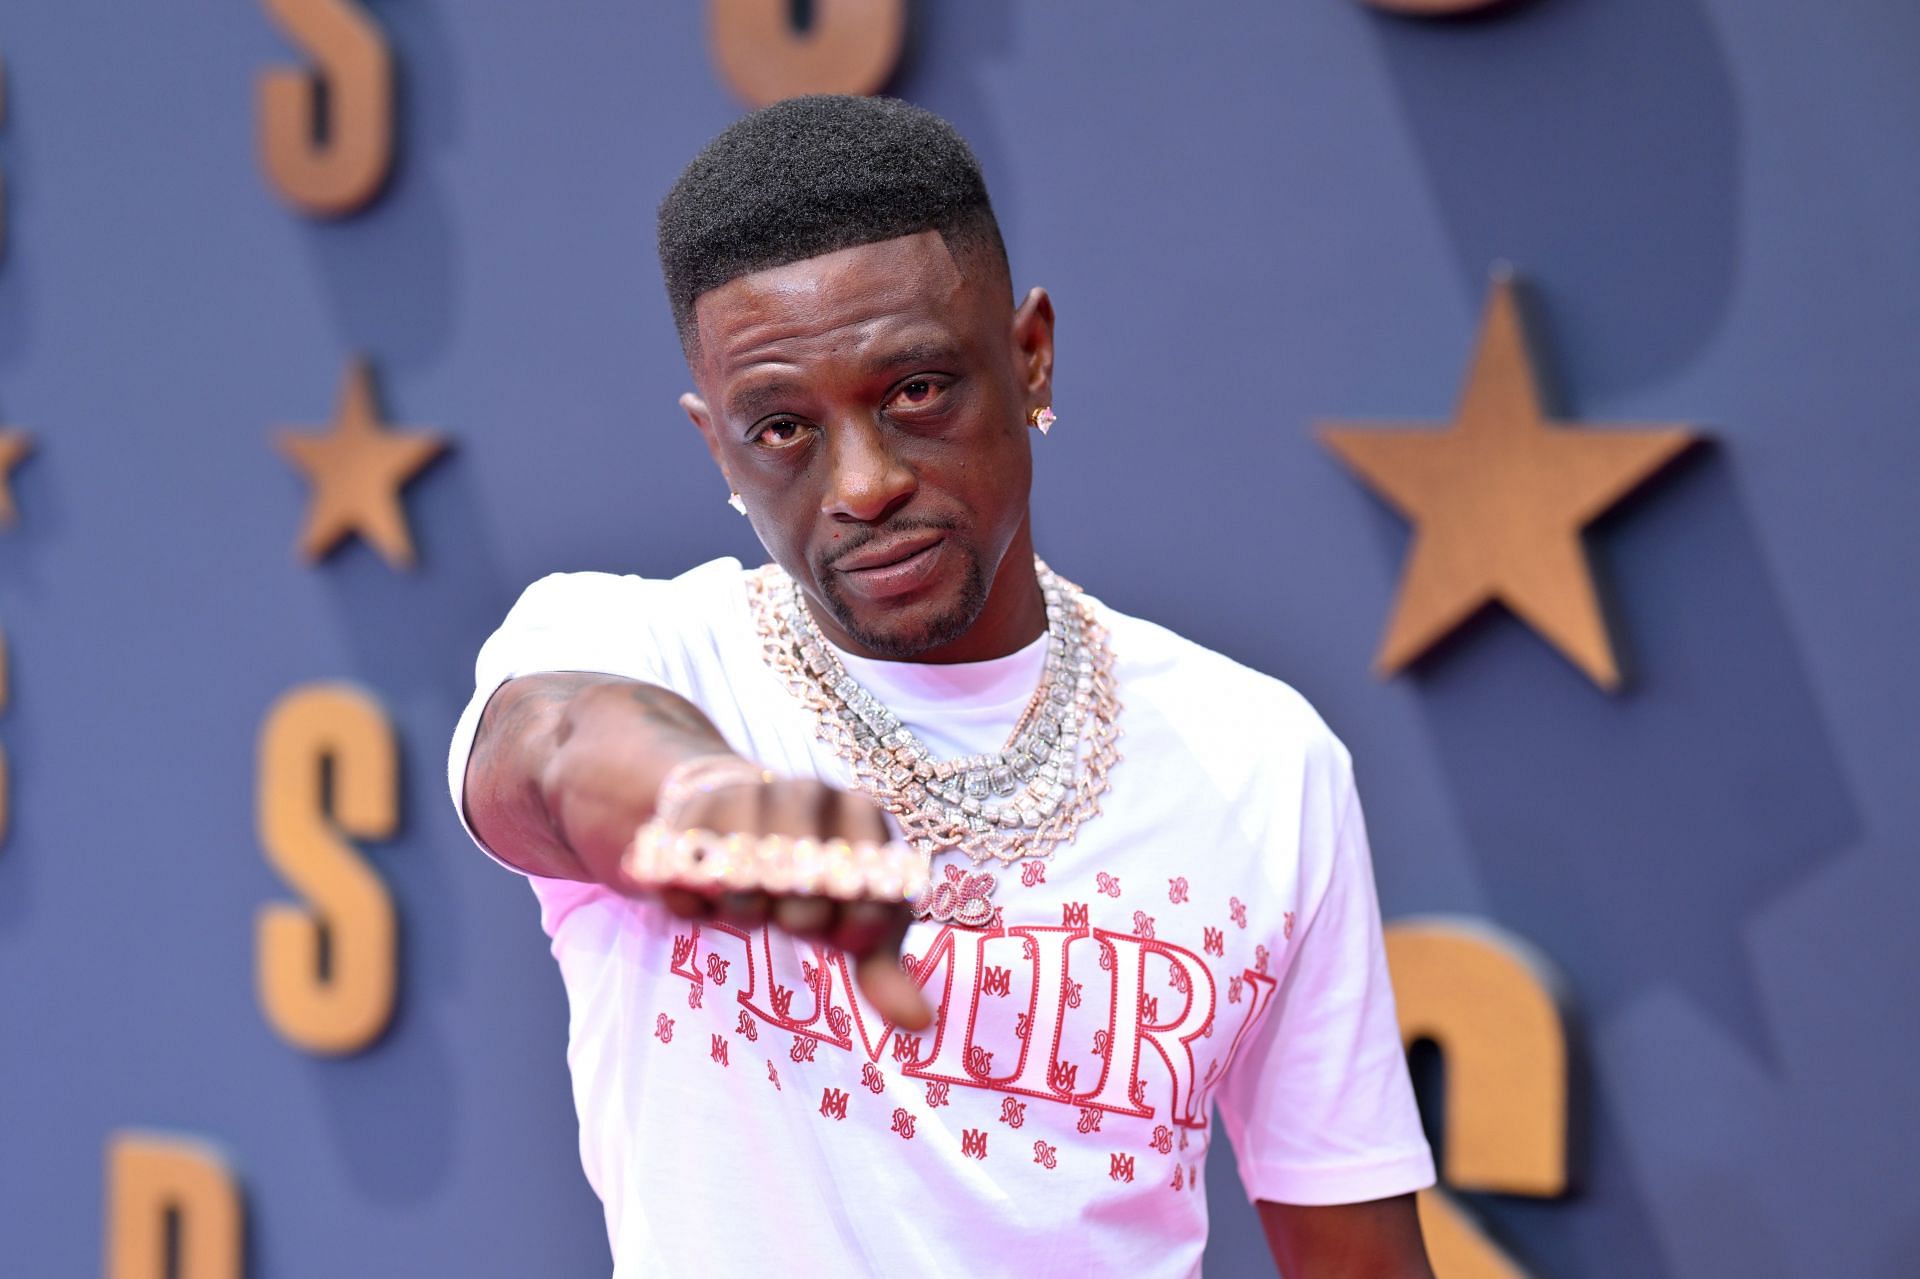 Boosie at the BET Awards, 2023. (Photo by Paras Griffin/Getty Images for BET)